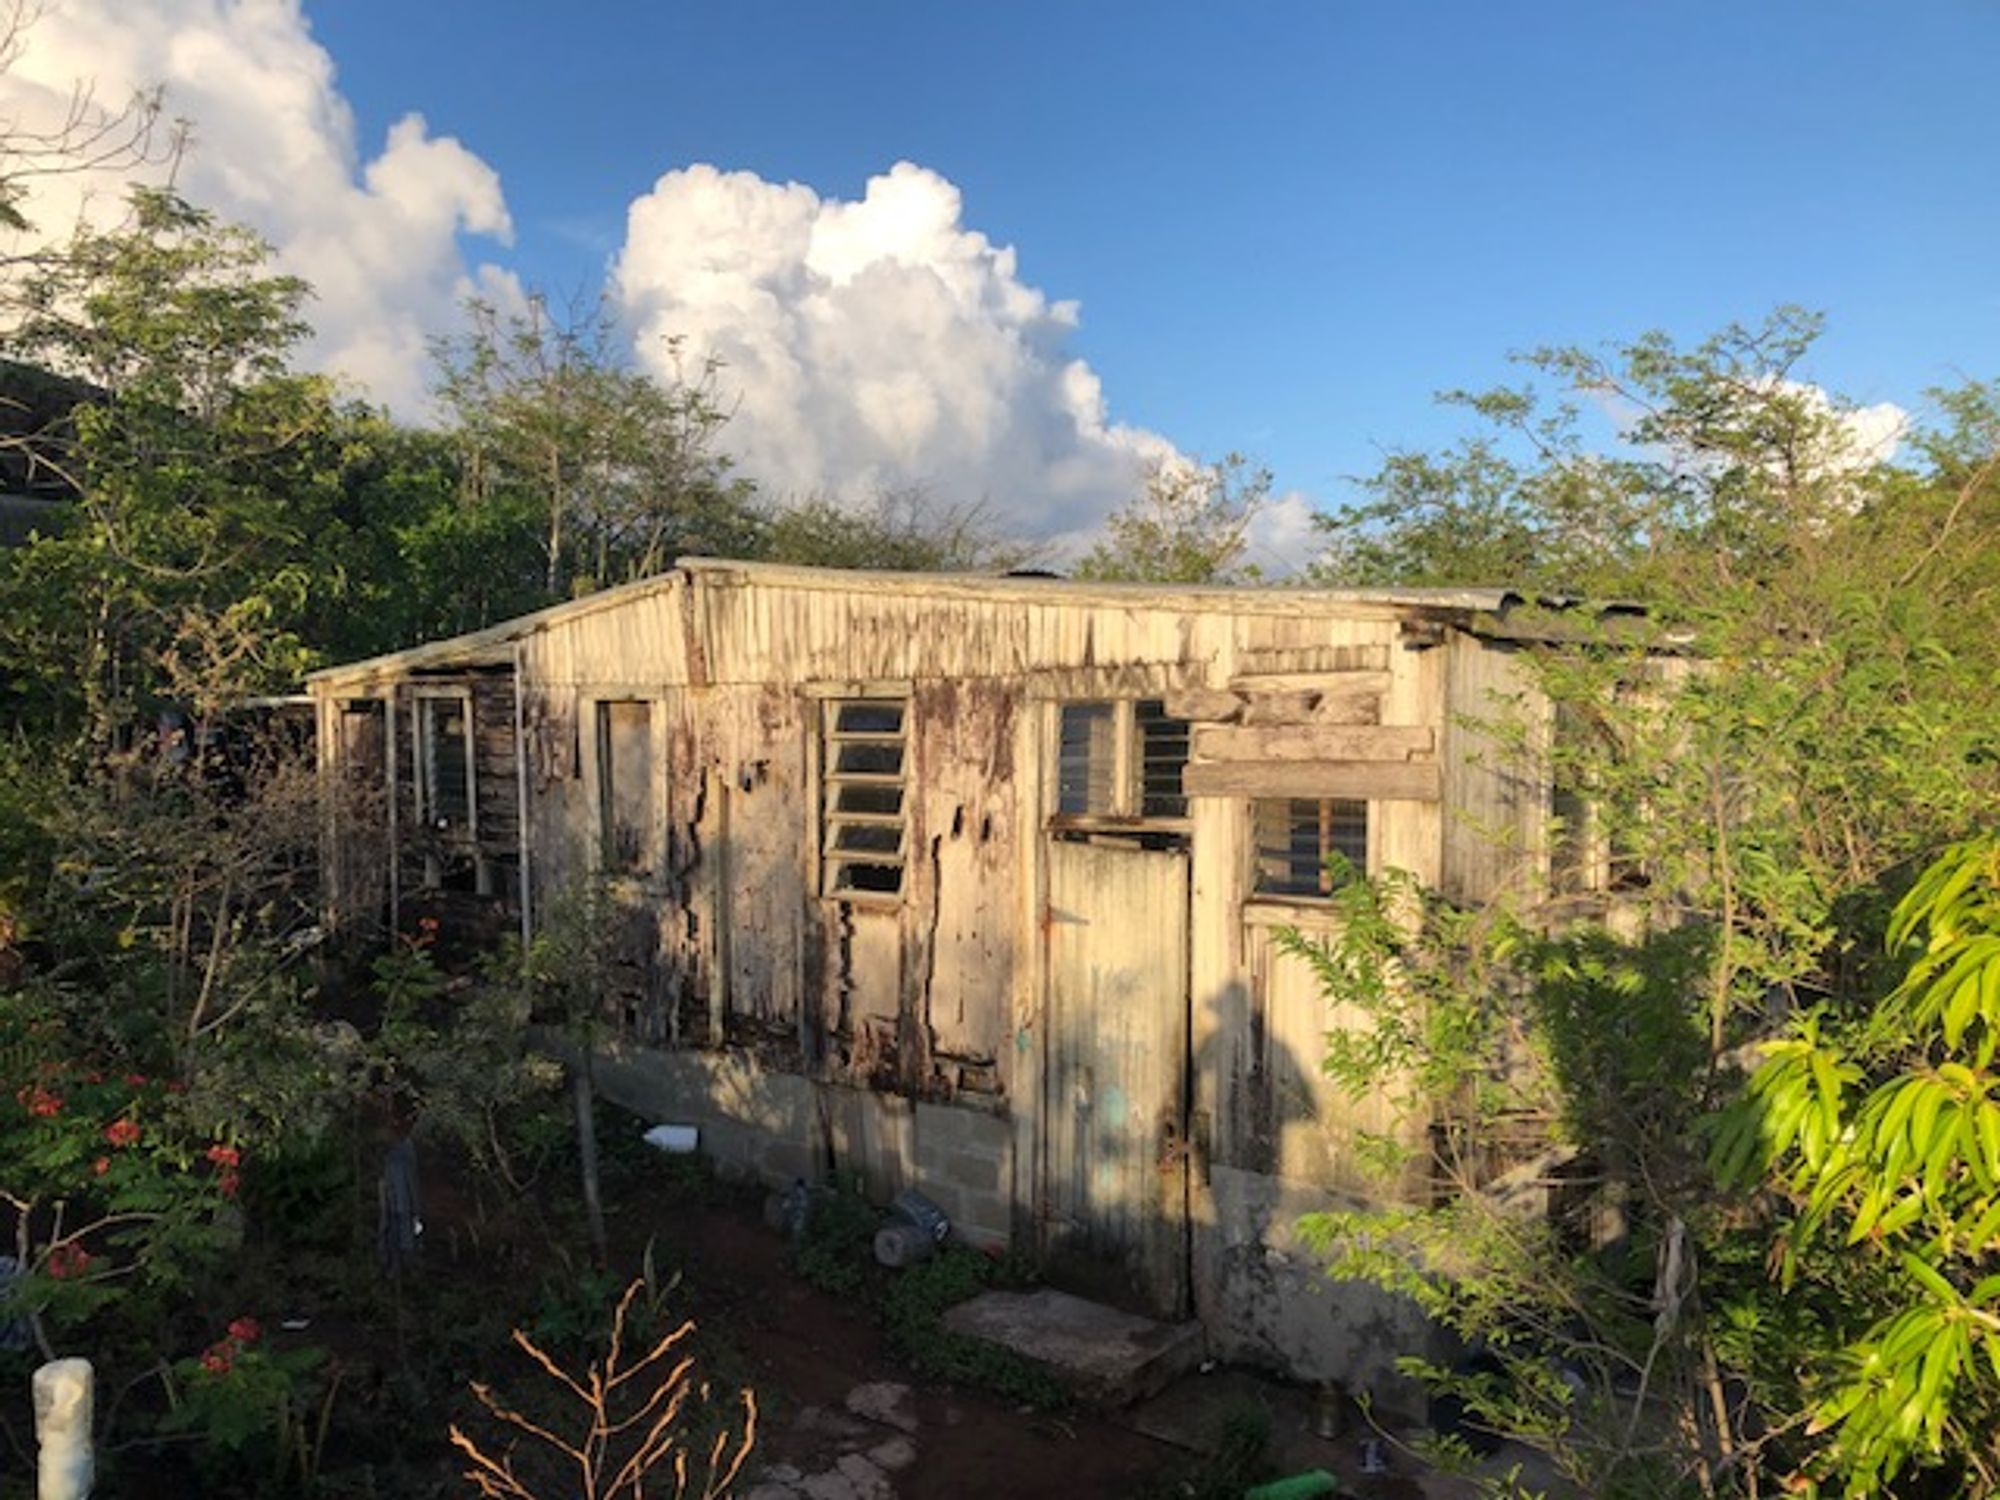 An old, dilapidated home in a tropical climate